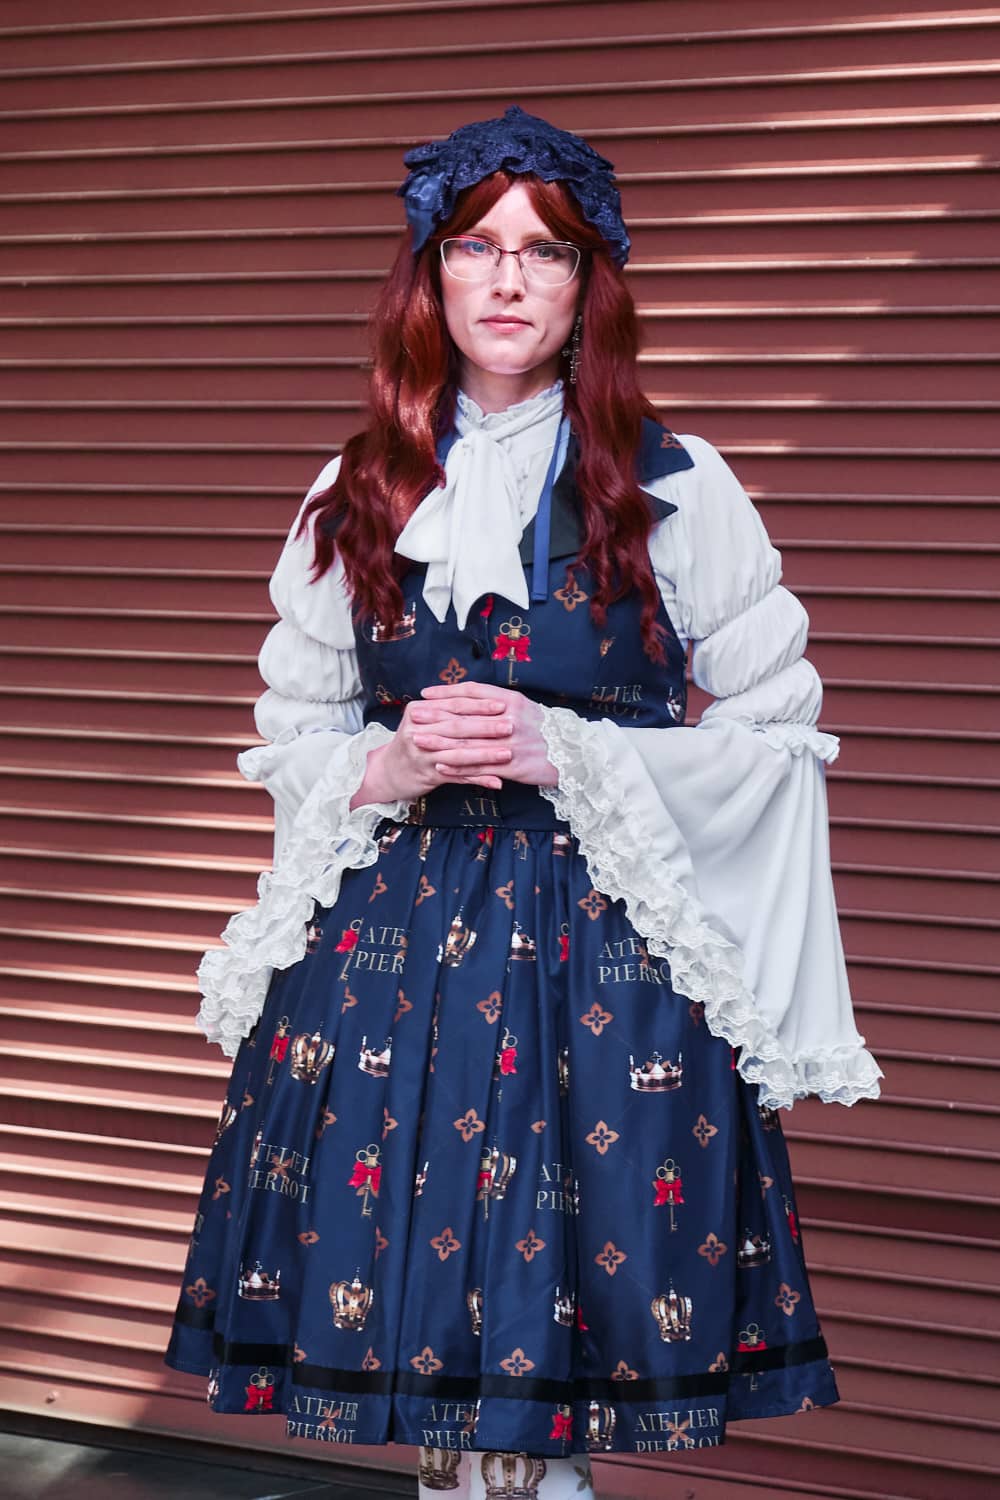 Atelier Pierrot classic lolita model wearing white princess sleeve blouse with crown print vest-style jumperskirt and matching crown tights - portrait.